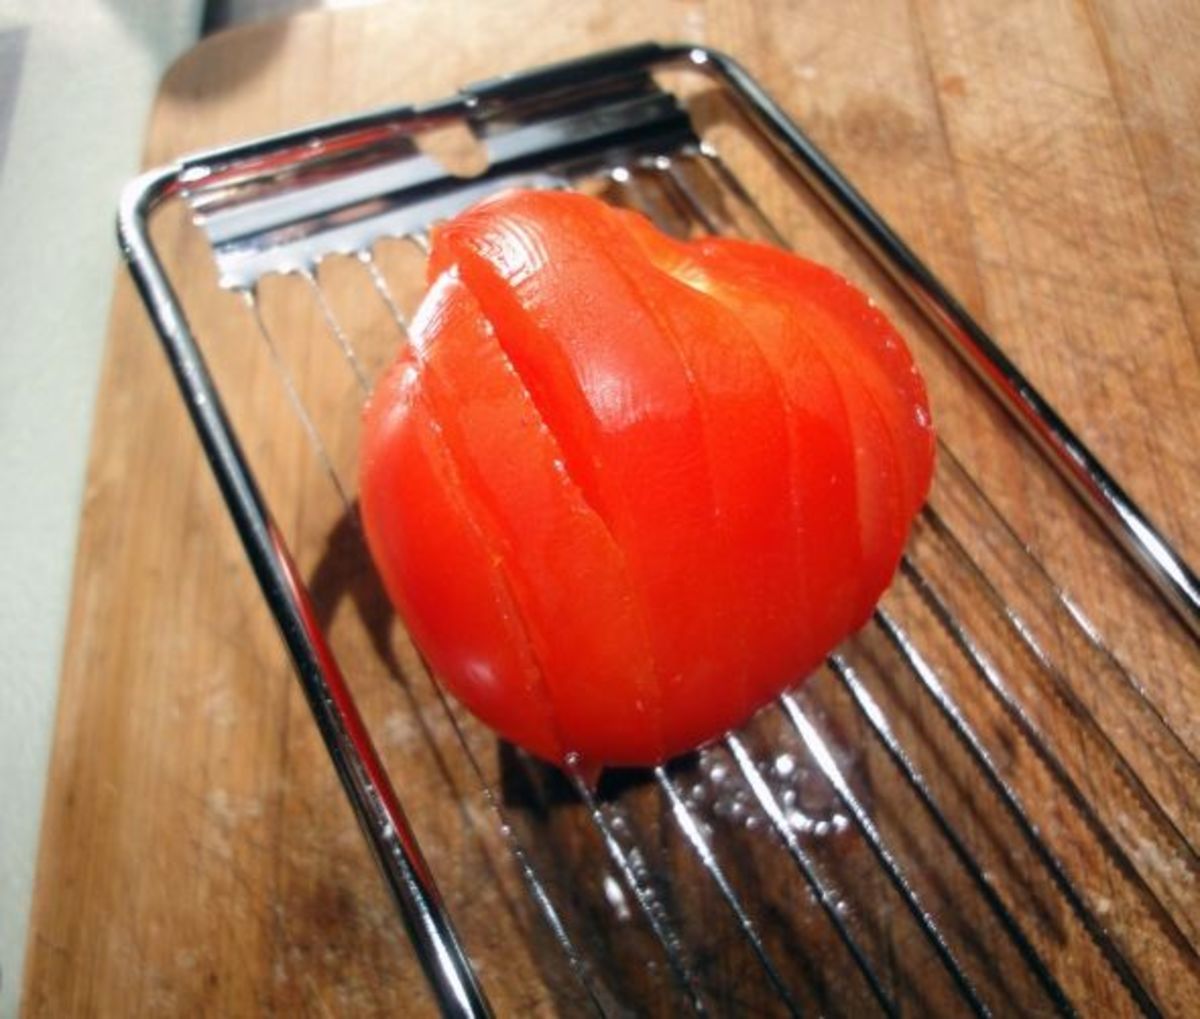 The tomato slicer I currently use for thinly slicing tomatoes.